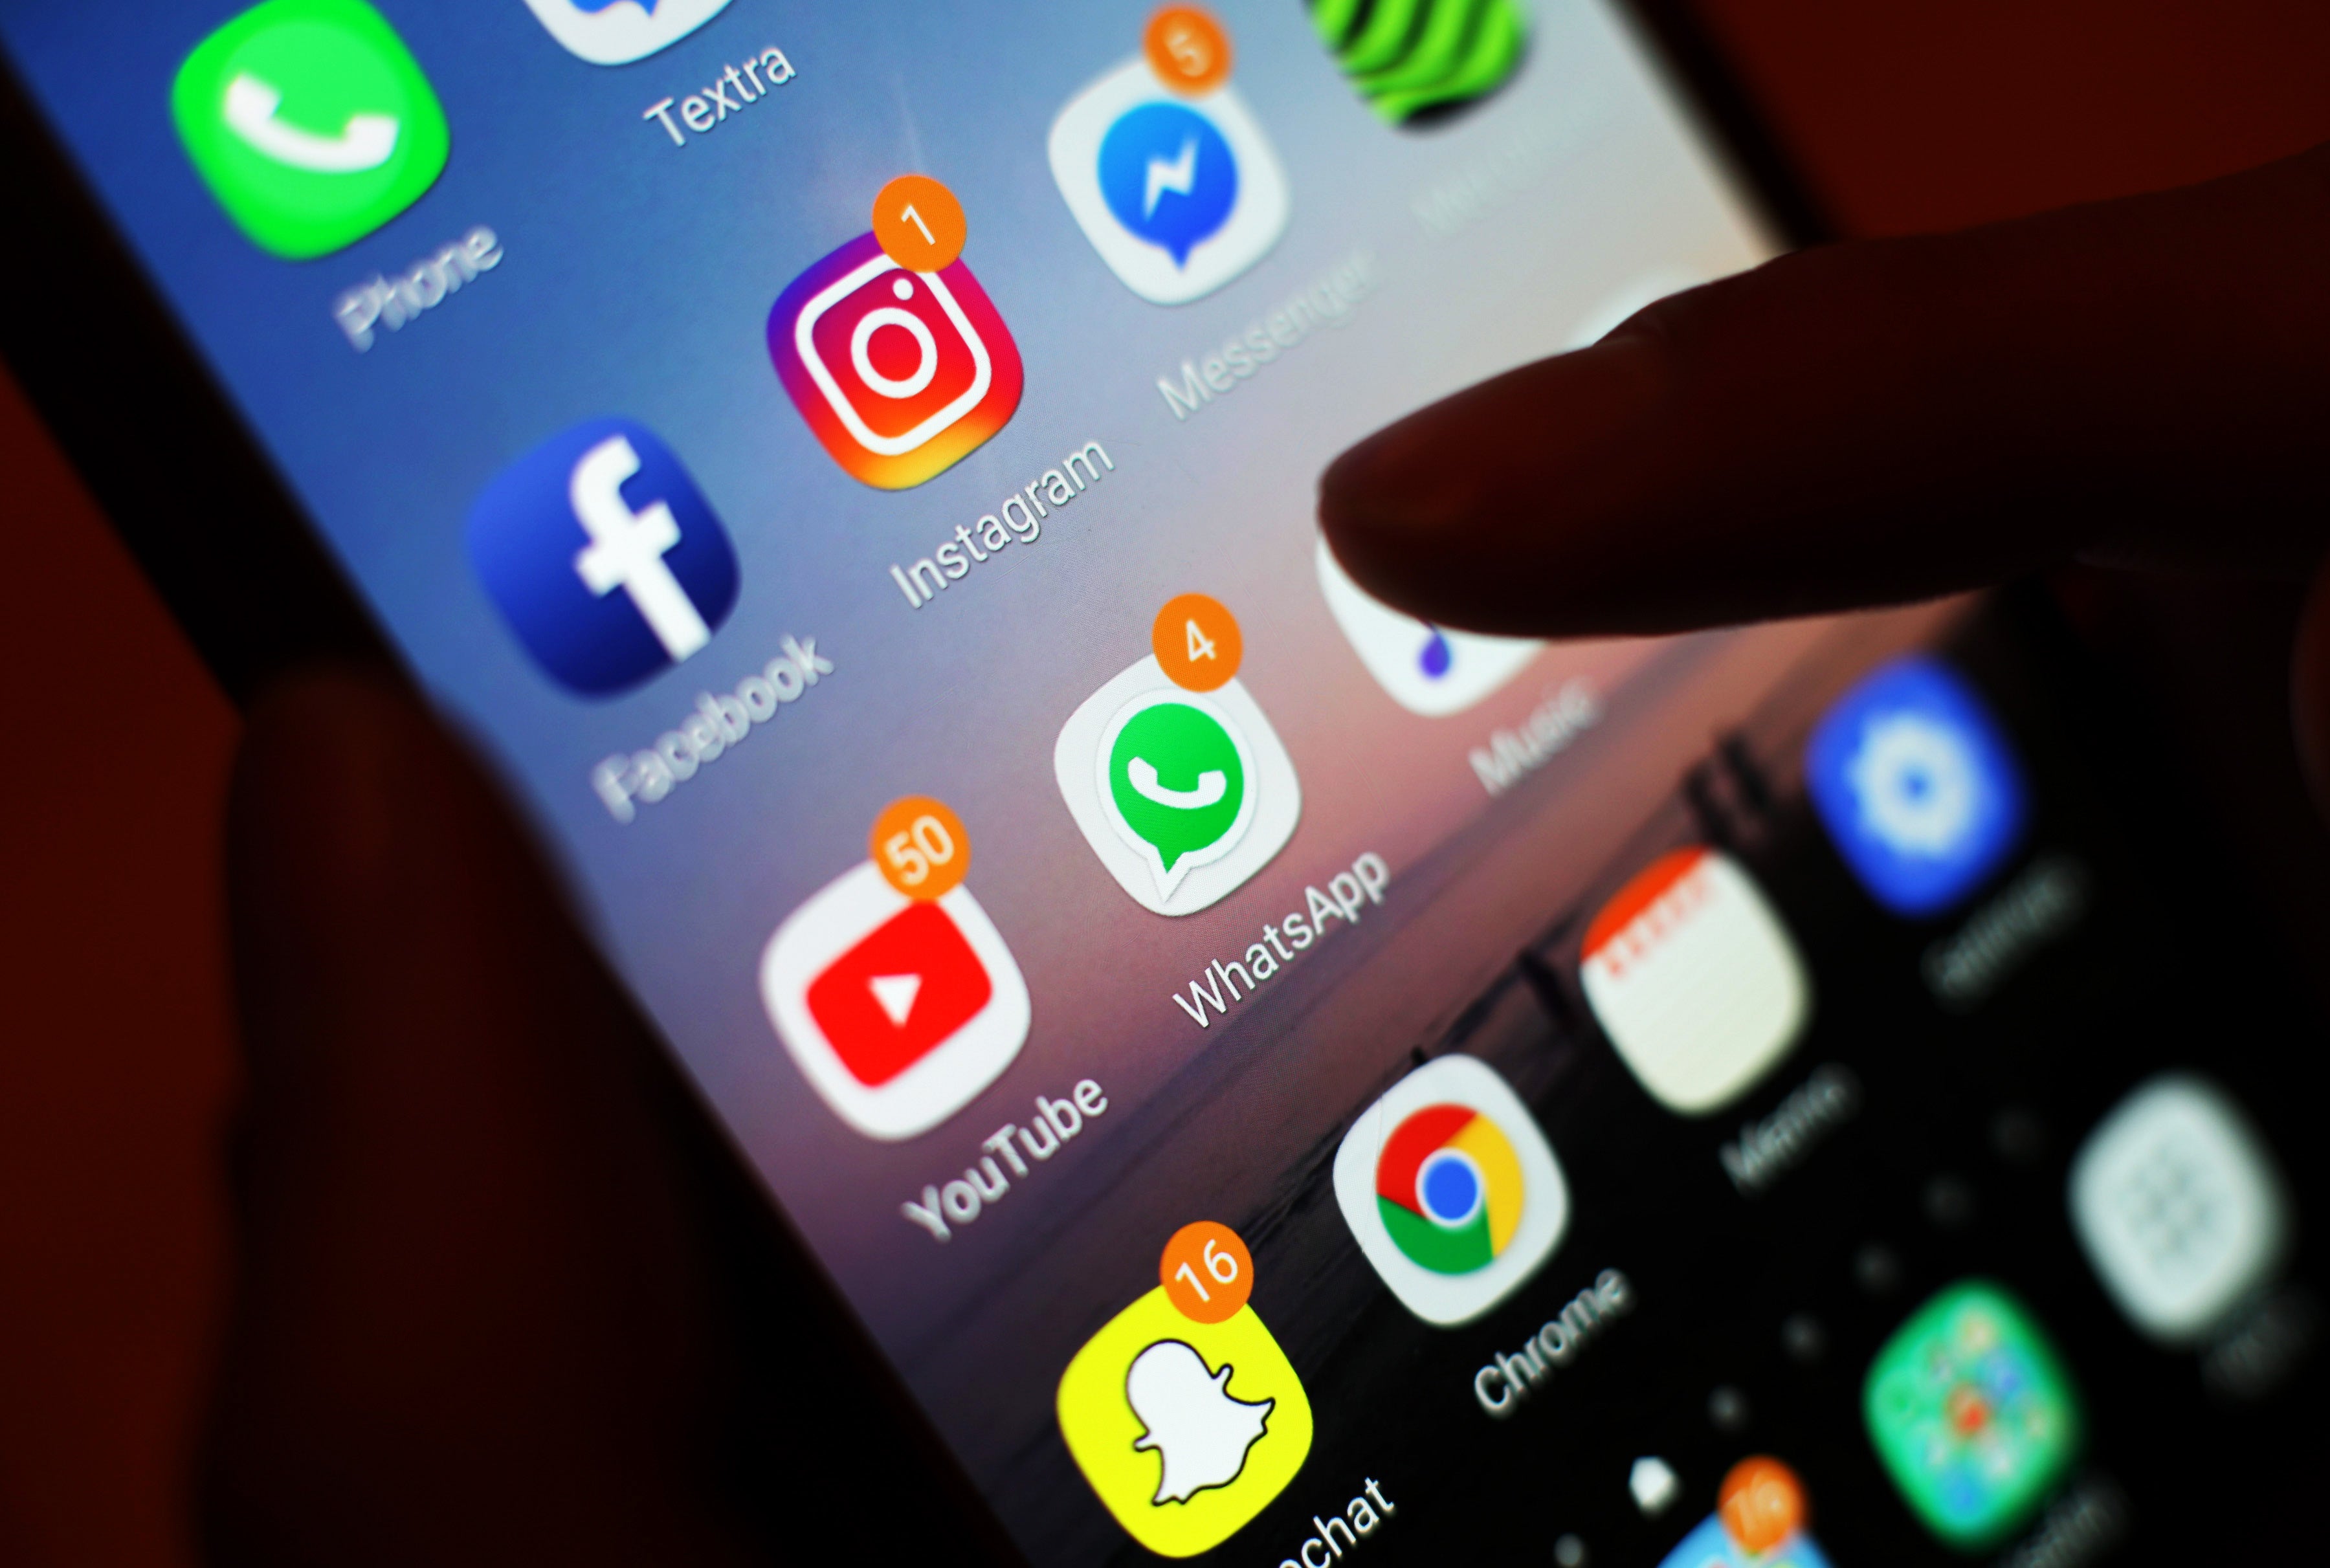 Social media giants should have effective age checking tools, Ofcom has said